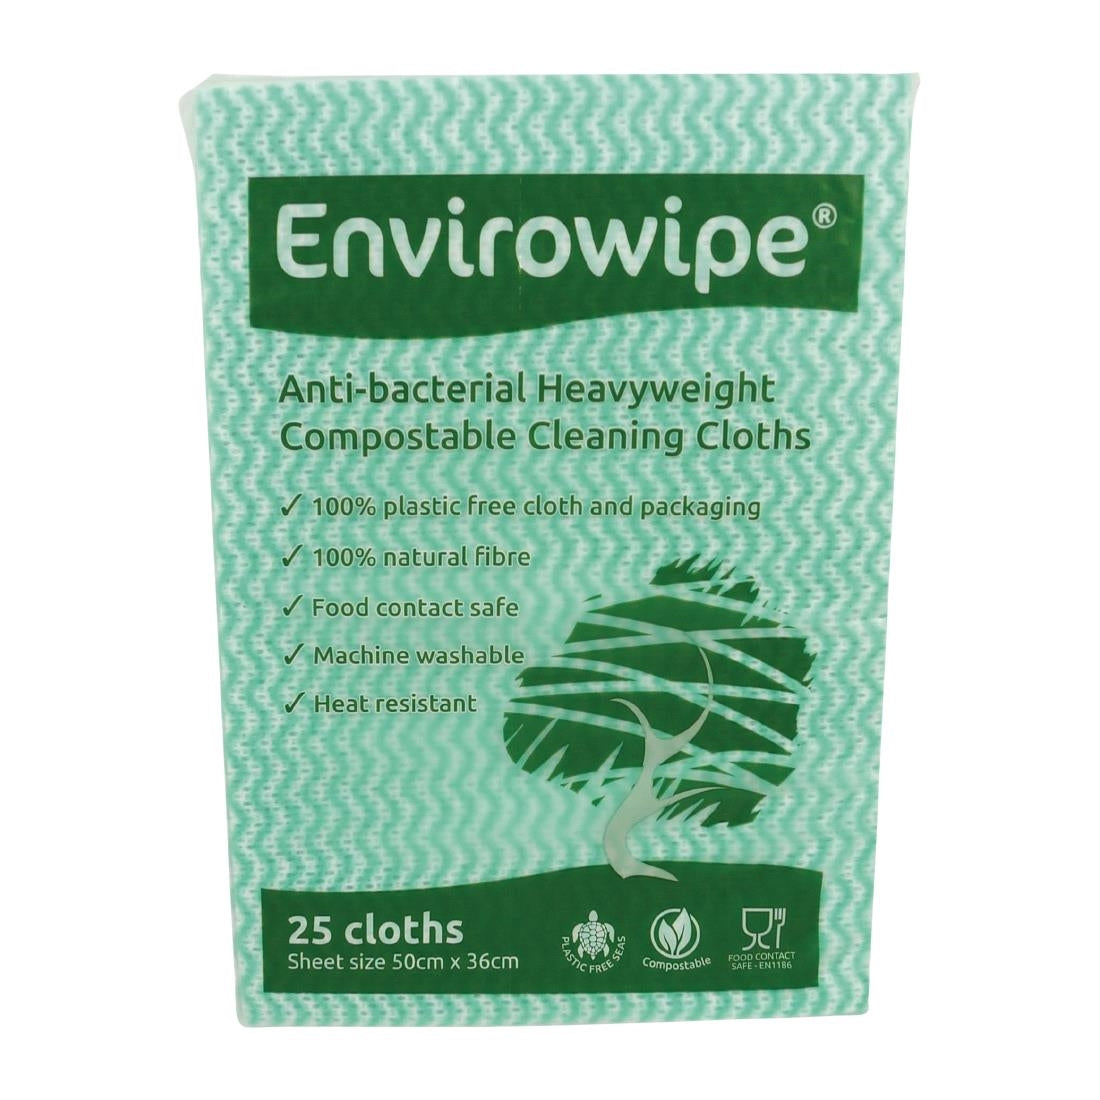 FA211 EcoTech Envirowipe Antibacterial Compostable Cleaning Cloths Green (25 Pack)